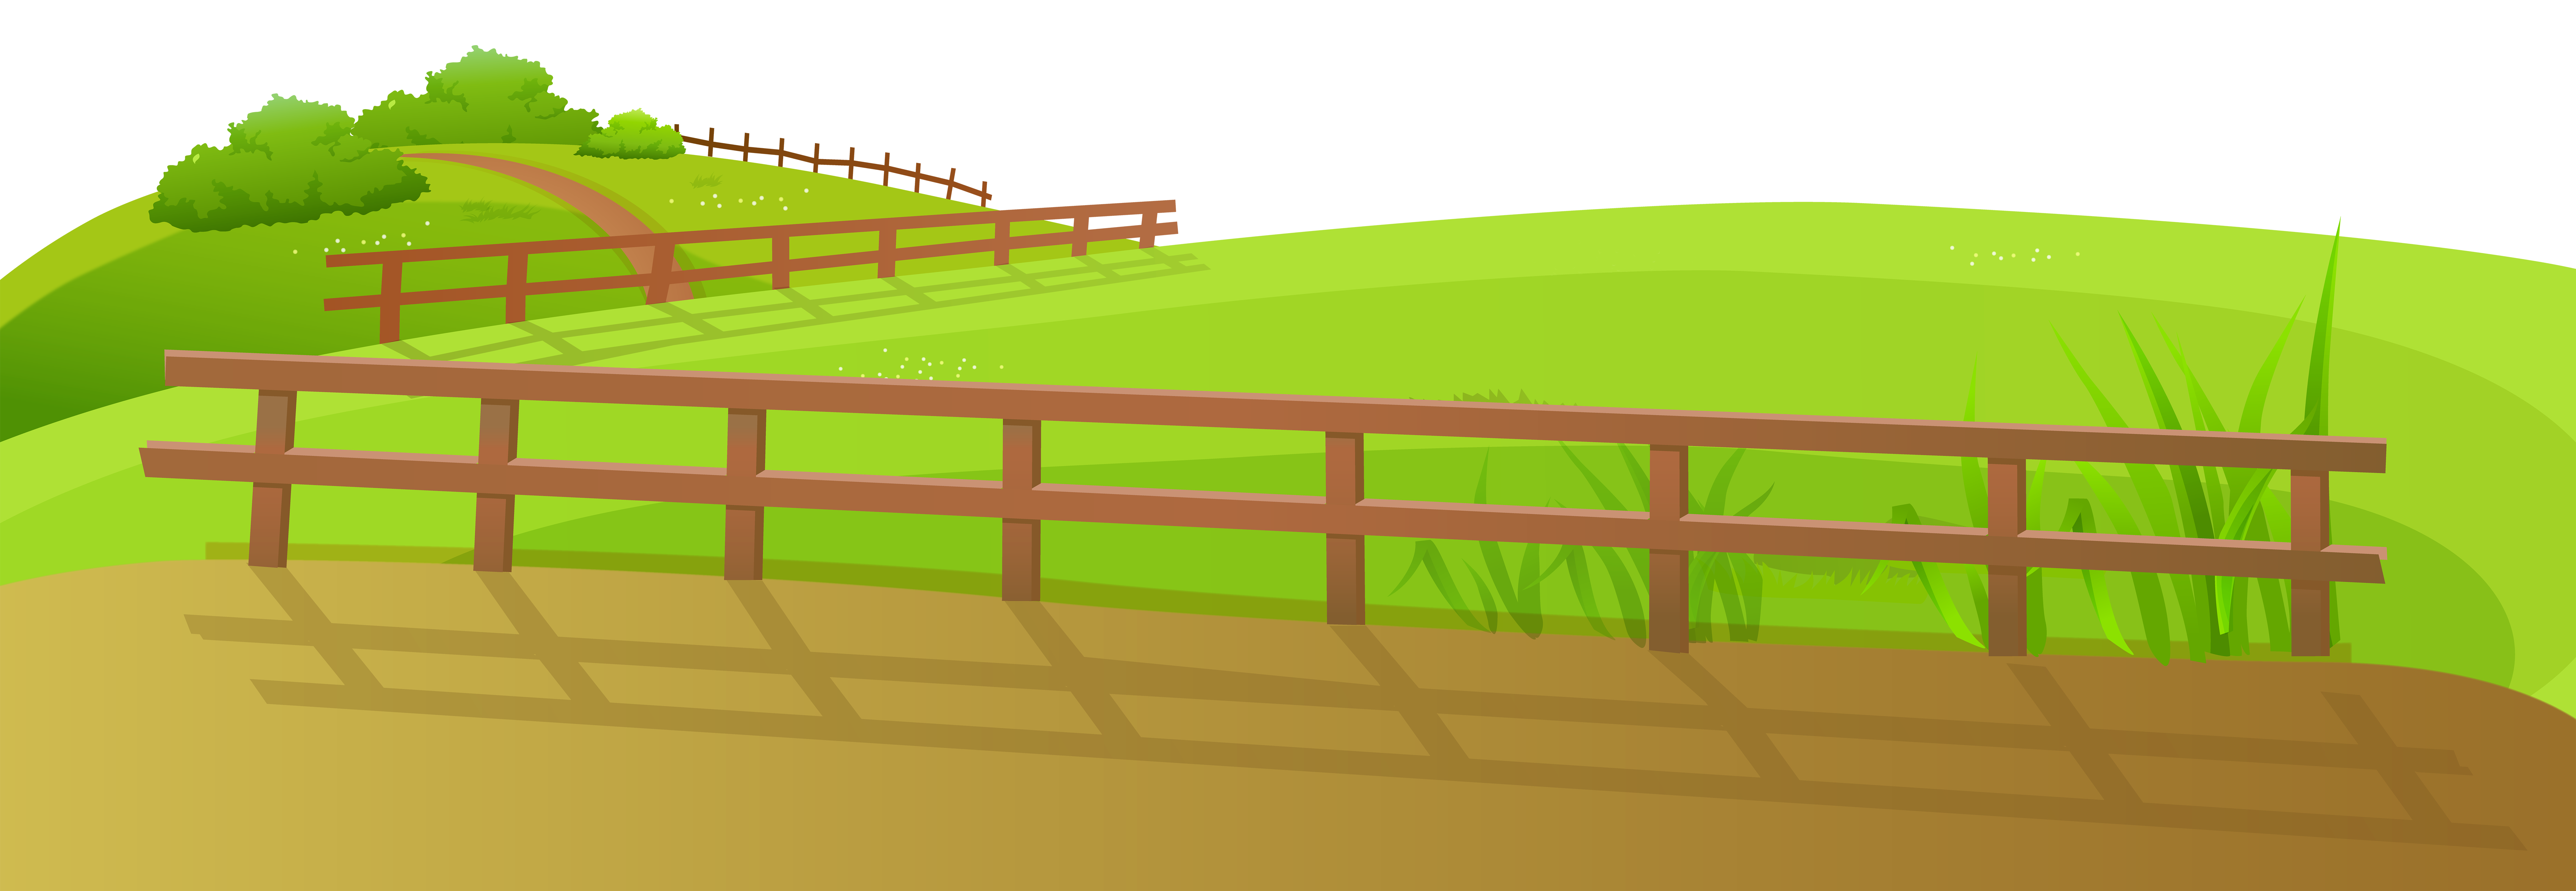 Field clipart farming. Grass ground with fence